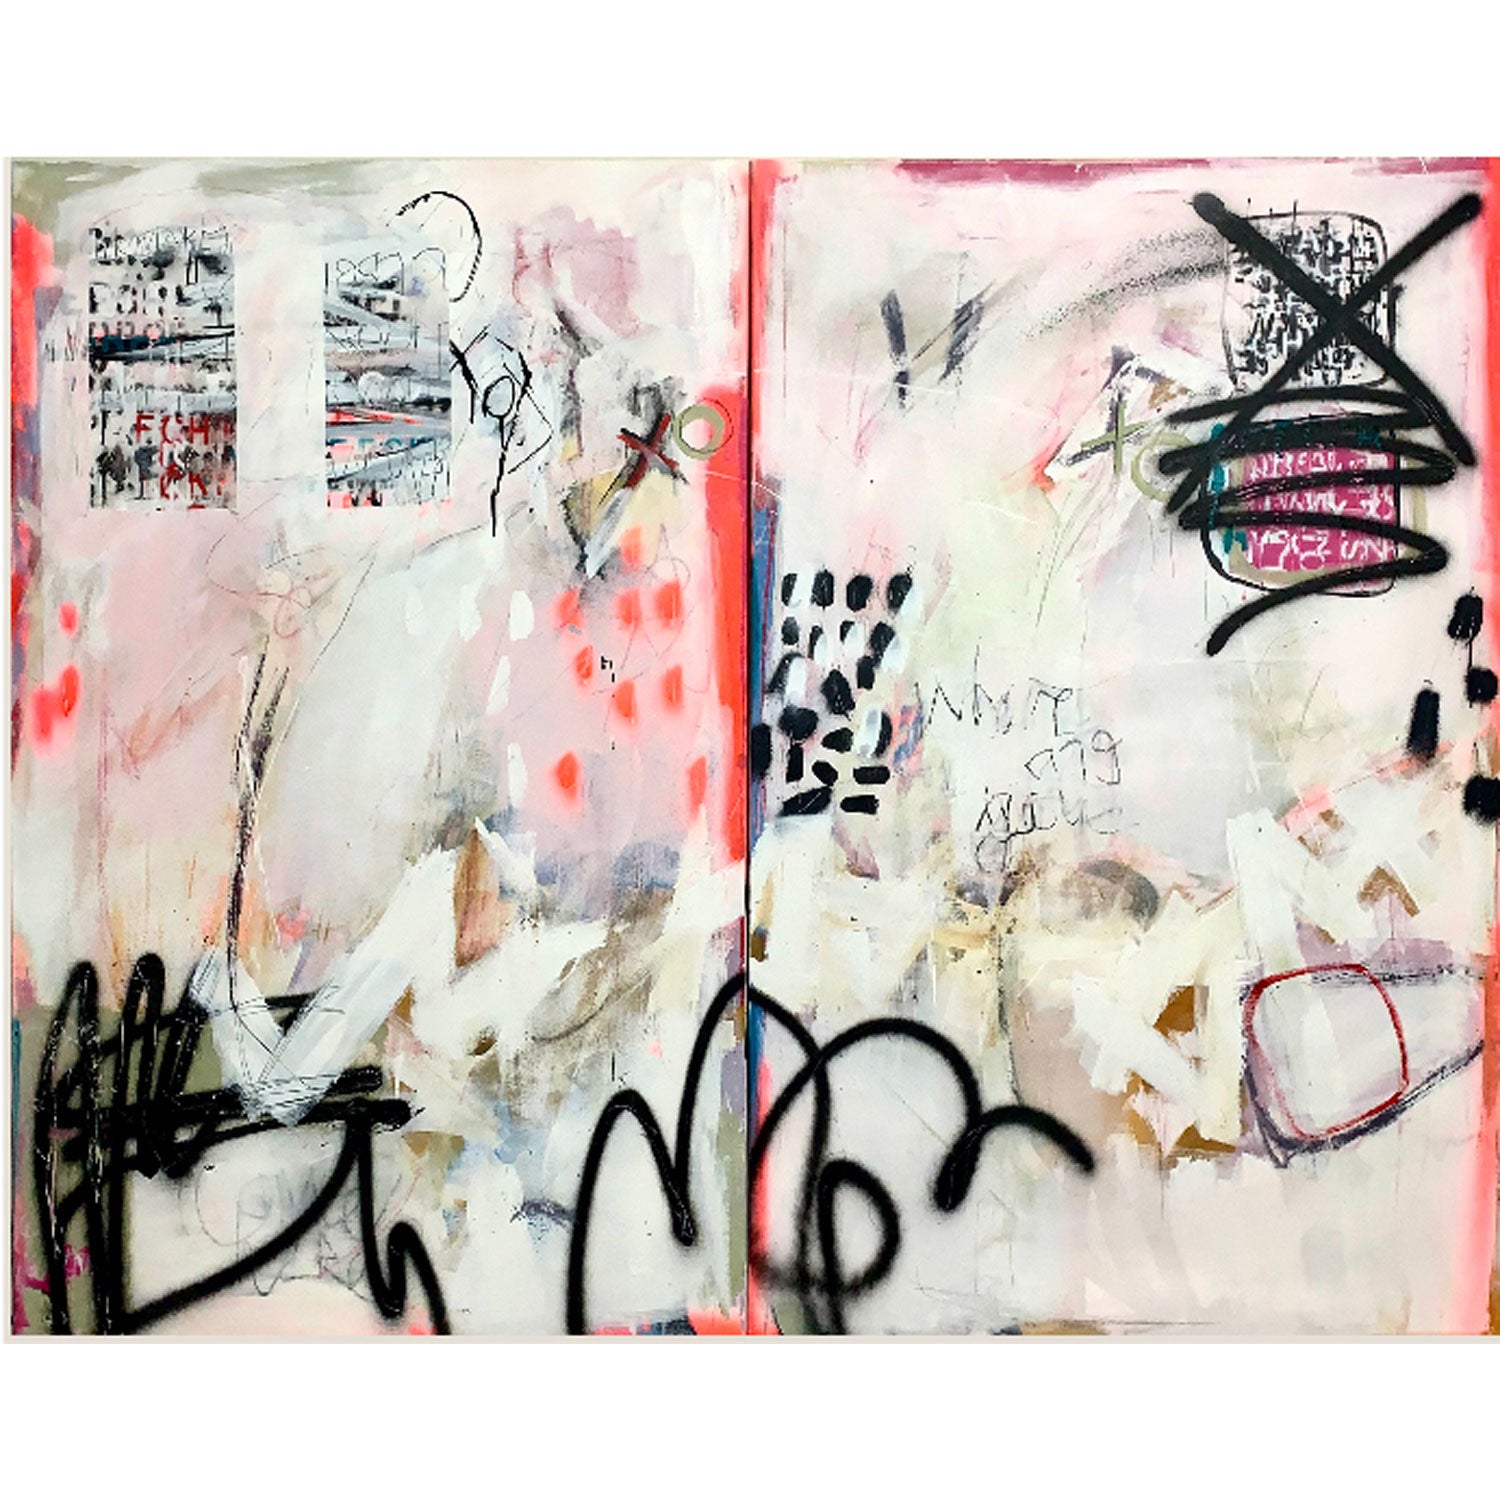 Suzanne Metz - What, where, why diptych 48" x 60"